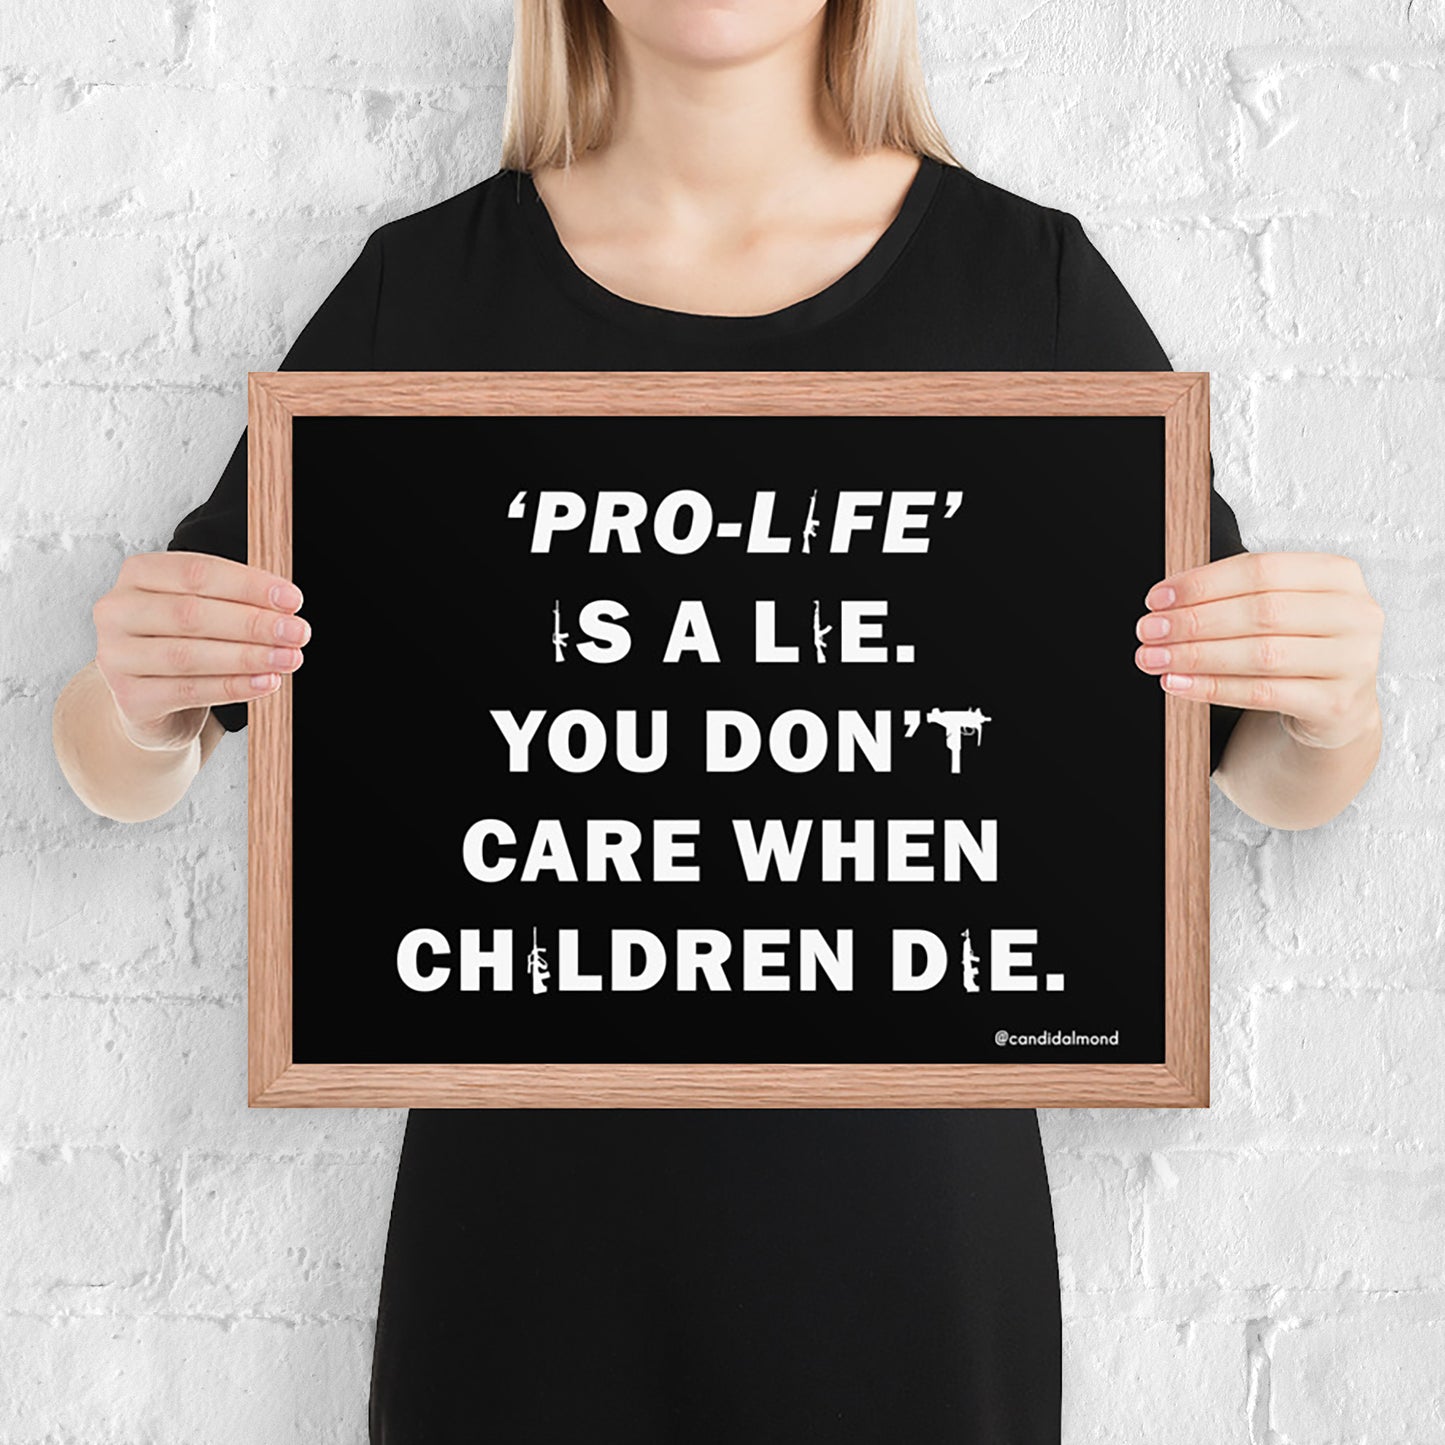 Abortion rights and gun control protest poster, red oak frame, size 16" x 12"